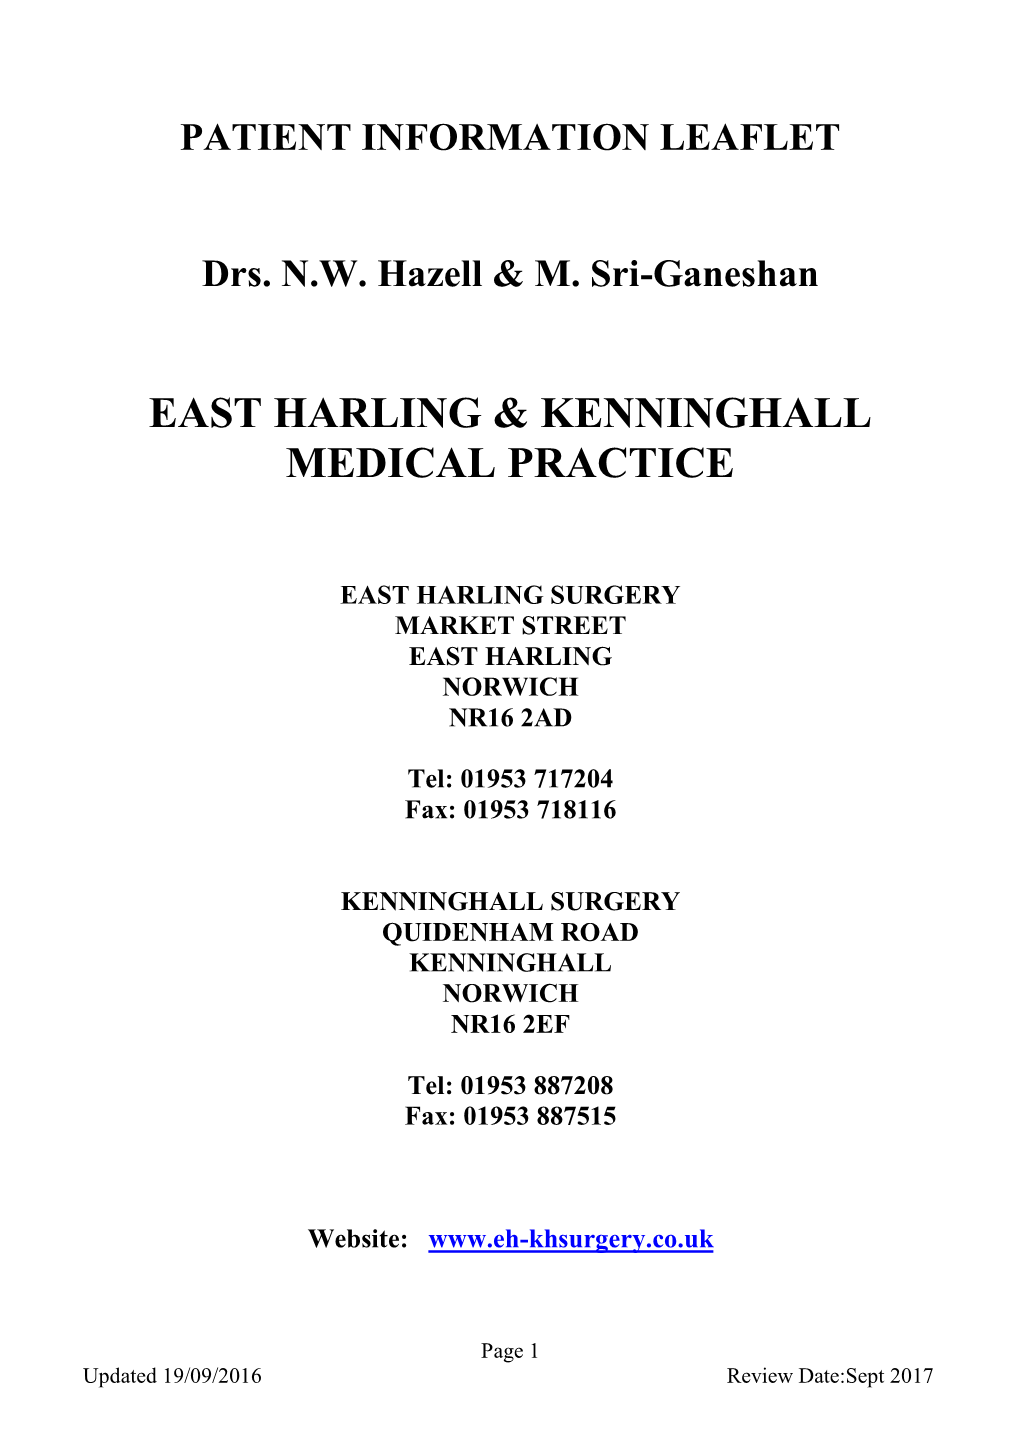 East Harling & Kenninghall Medical Practice